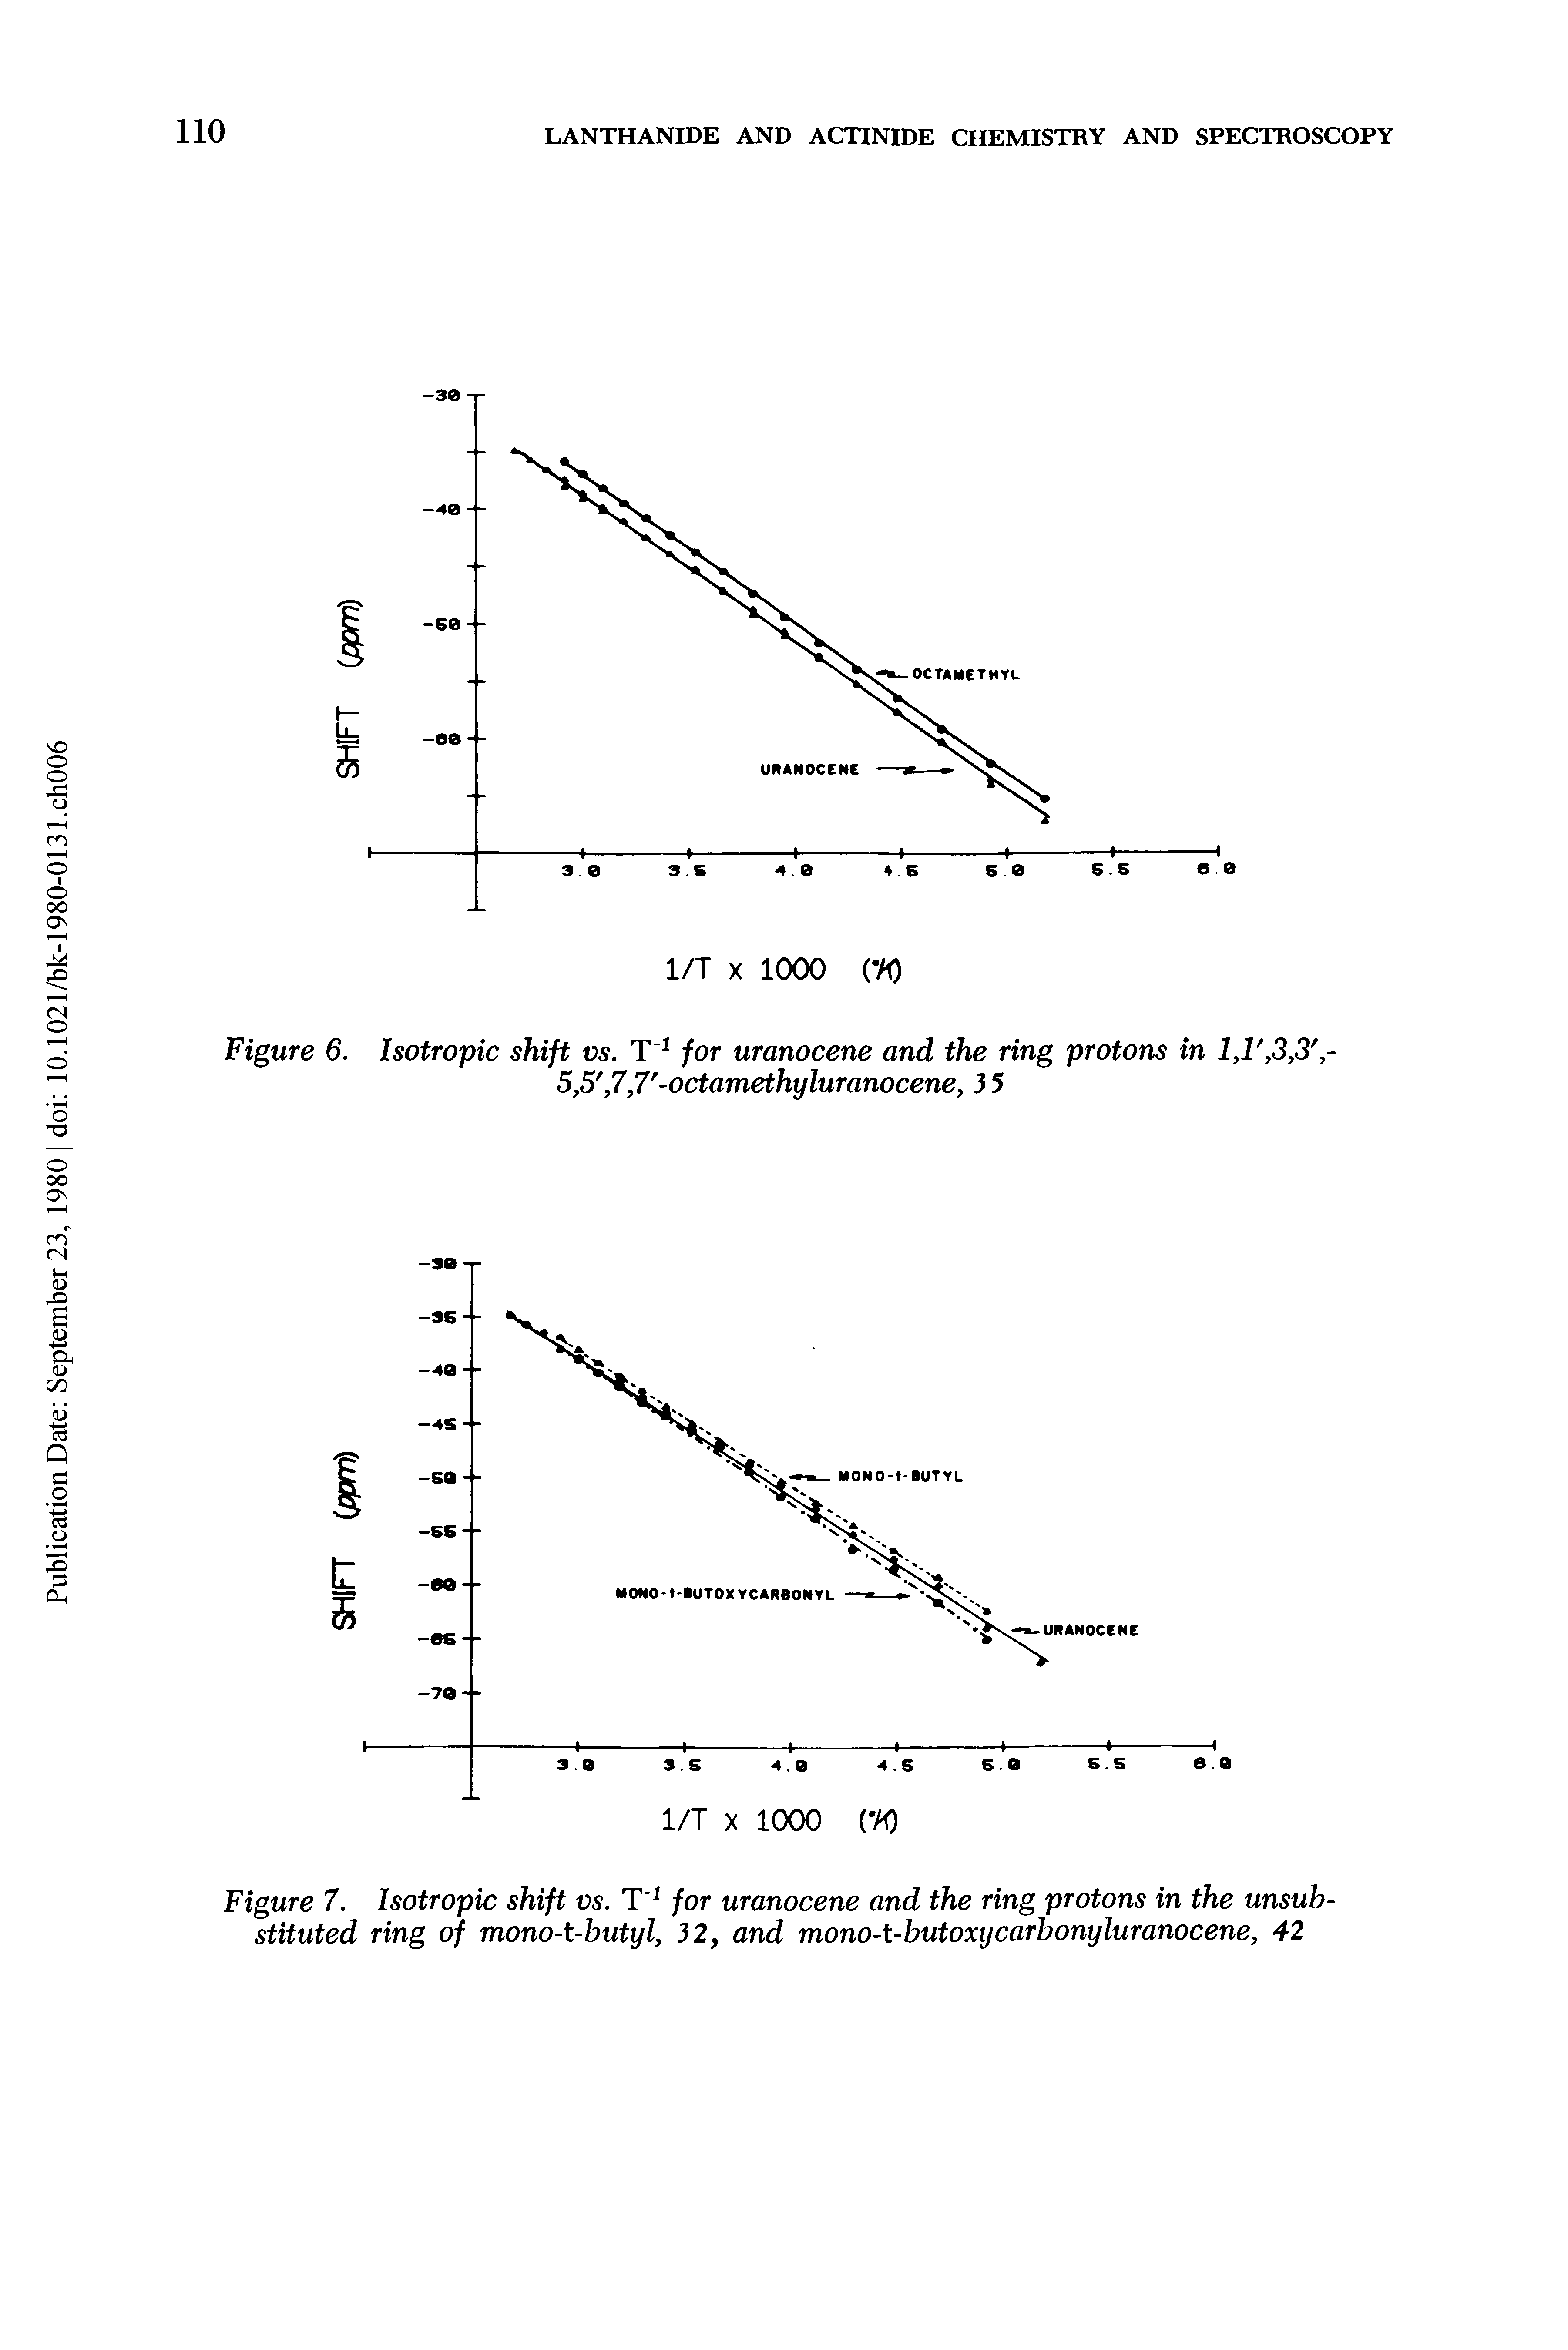 Figure 7. Isotropic shift vs. T 1 for uranocene and the ring protons in the unsubstituted ring of mono-t-butyl, 32, and mono-t-butoxycarbonyluranocene, 42...